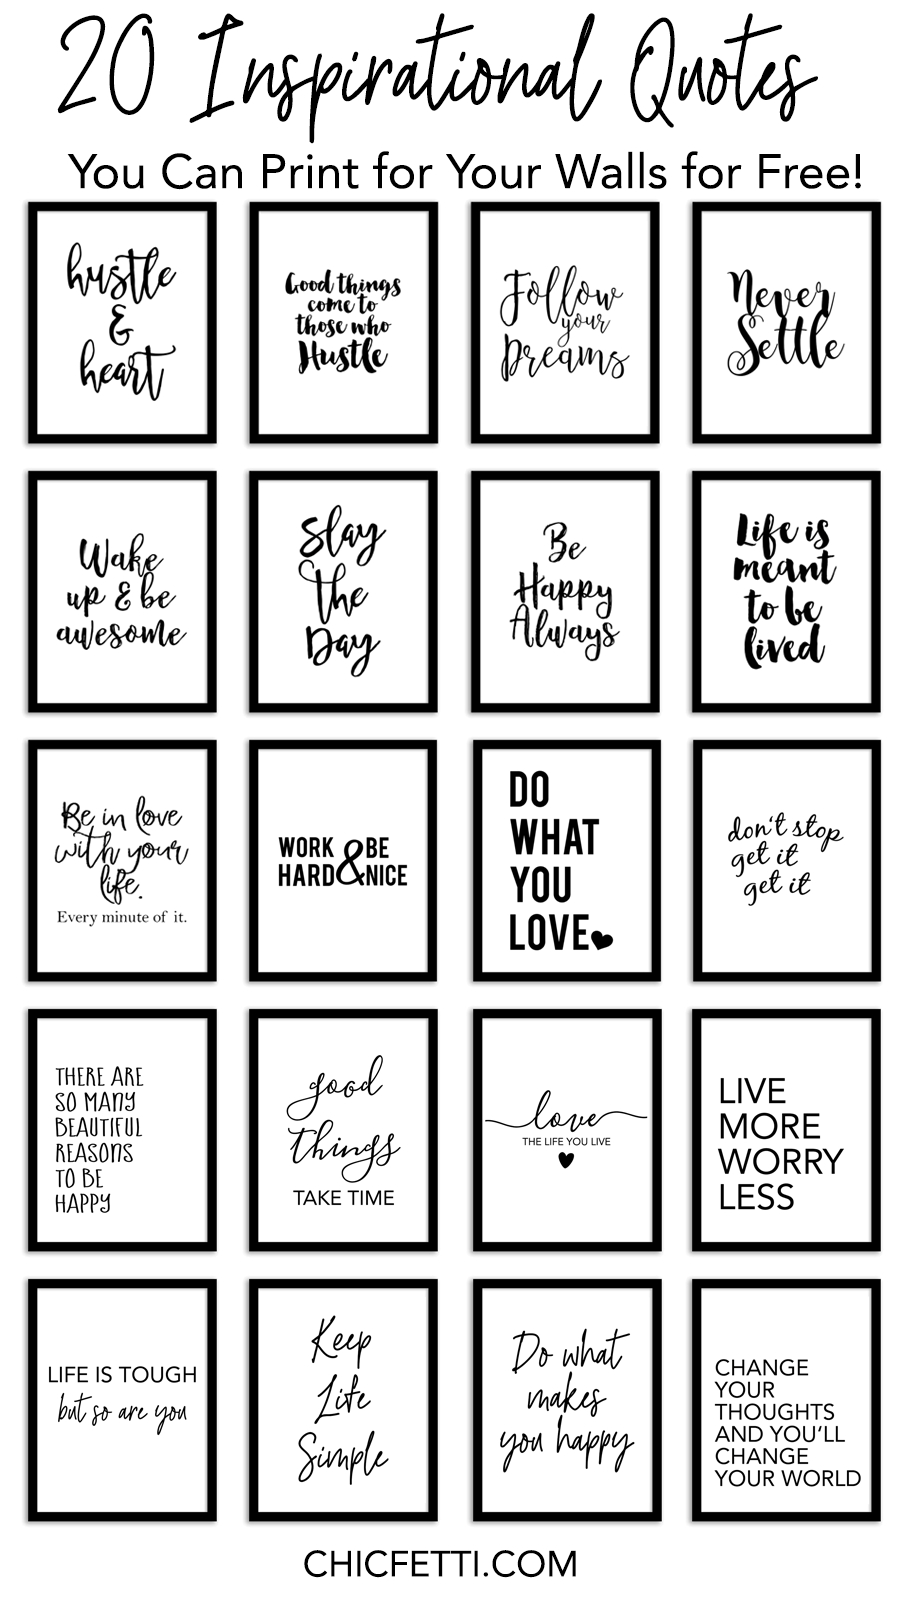 20 Inspirational Quotes You Can Print For Your Walls For Free - Free Printable Images